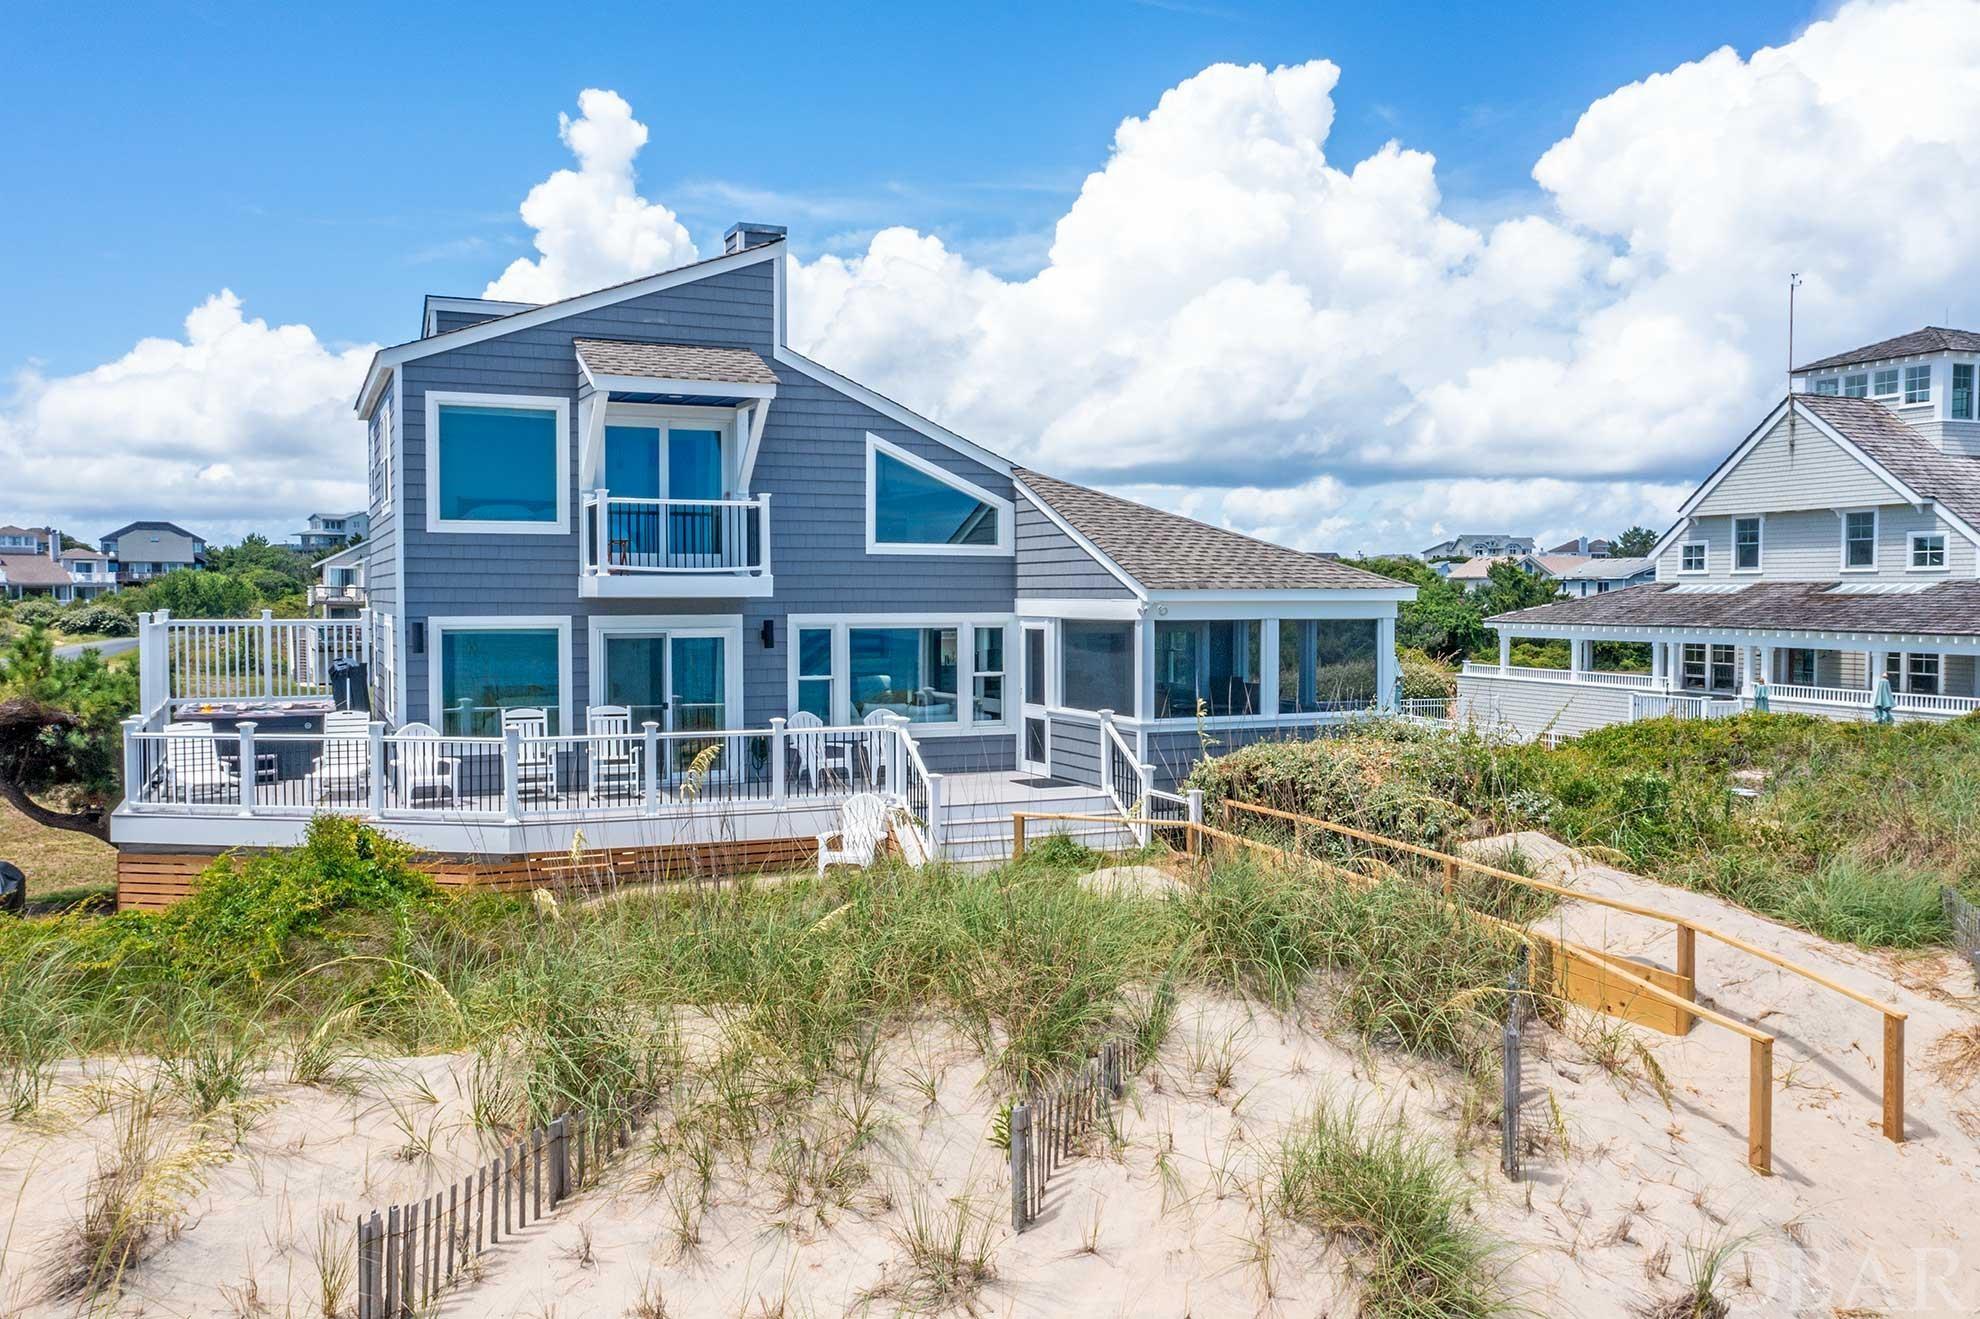 Step into unparalleled luxury with this recently renovated oceanfront masterpiece in the prestigious town of Duck. Outstanding investment opportunity with over $260,000 in gross rental income for 2023 with bookings in place for 2024.  Situated on a lot and a half, spanning a rare 120-feet of oceanfront, this opulent retreat offers panoramic ocean views from almost every room. This residence takes exclusivity a step further. Its proximity to Army Corps land provides an almost private beach experience, enhanced by recent beach nourishment. Substantial updates completed in 2022 and 2023 have elevated this estate to a realm of unmatched luxury. Within its open-concept layout, you'll find a state-of-the-art gourmet kitchen, replete with custom J&K Cabinetry, new countertops, and cutting-edge appliances. The entire home shines under new luxury light fixtures and ceiling fans, all powered by an entirely new electrical system and box. Comfort is paramount, with a brand-new HVAC system, reinforced subflooring, and luxury vinyl flooring. Slide open your new glass doors and step onto the freshly installed composite decking to soak in your hot tub with an ocean view, or catch a sunrise from the screened-in porch. Alternatively, socialize at the private community pool and well-appointed bathhouse. The home's structural integrity has been fortified with a new roof, new windows, and updated exterior walls and siding. All bathrooms were given the spa treatment with custom tile work, state-of-the-art fixtures, and vanities, with two additional bathrooms added for further convenience. Even the laundry room has been updated with a new washer and dryer. From its new interior and exterior paint to the modern coastal décor, every inch of this home screams luxury and attention to detail. It's not just a must-see; it's a must-own for the buyer who demands nothing less than the absolute best.